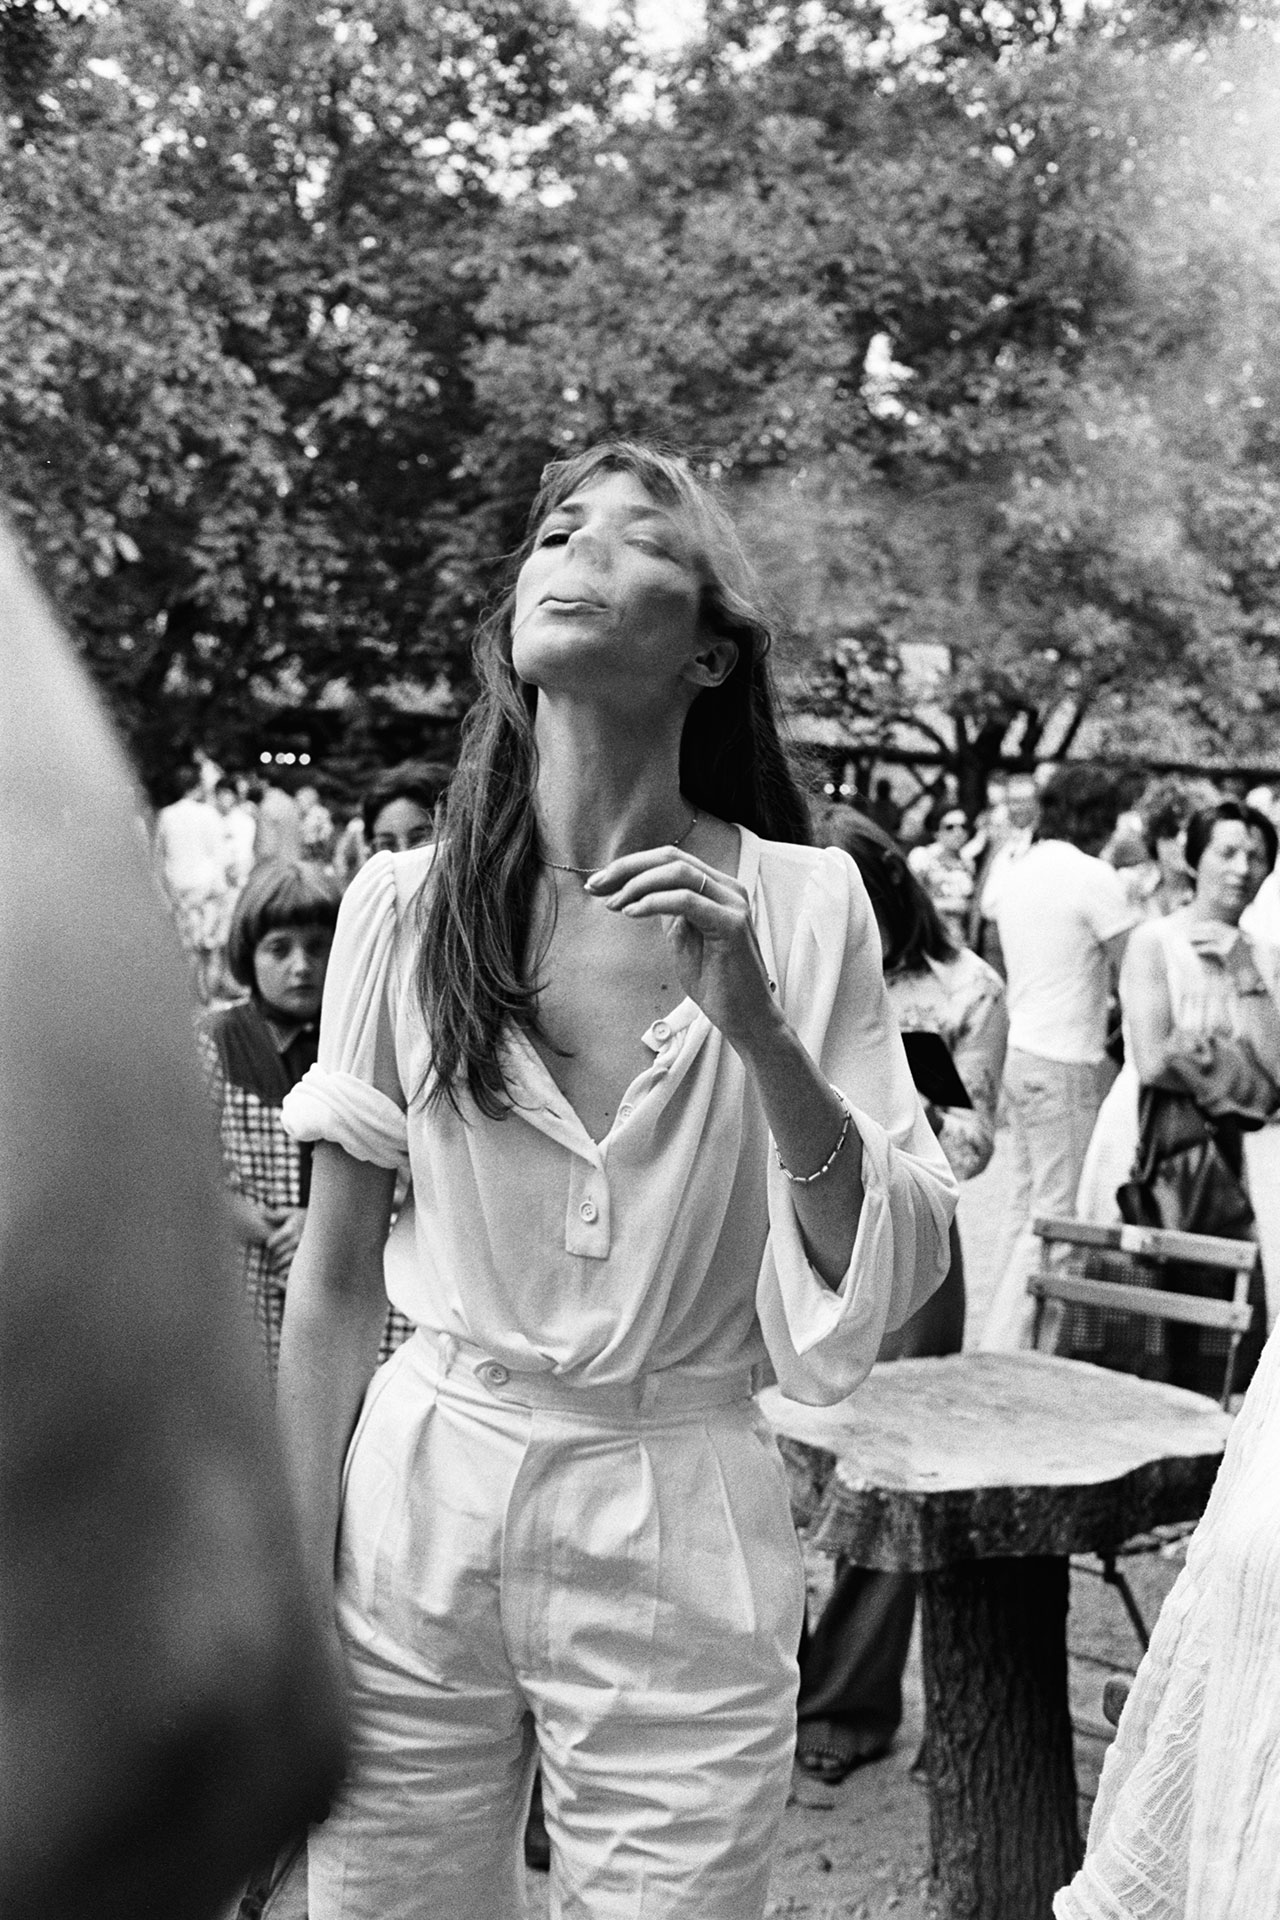 Vogue France - Jane Birkin wears a see-through dress with her iconic basket  bag with Serge Gainsbourg in 1970